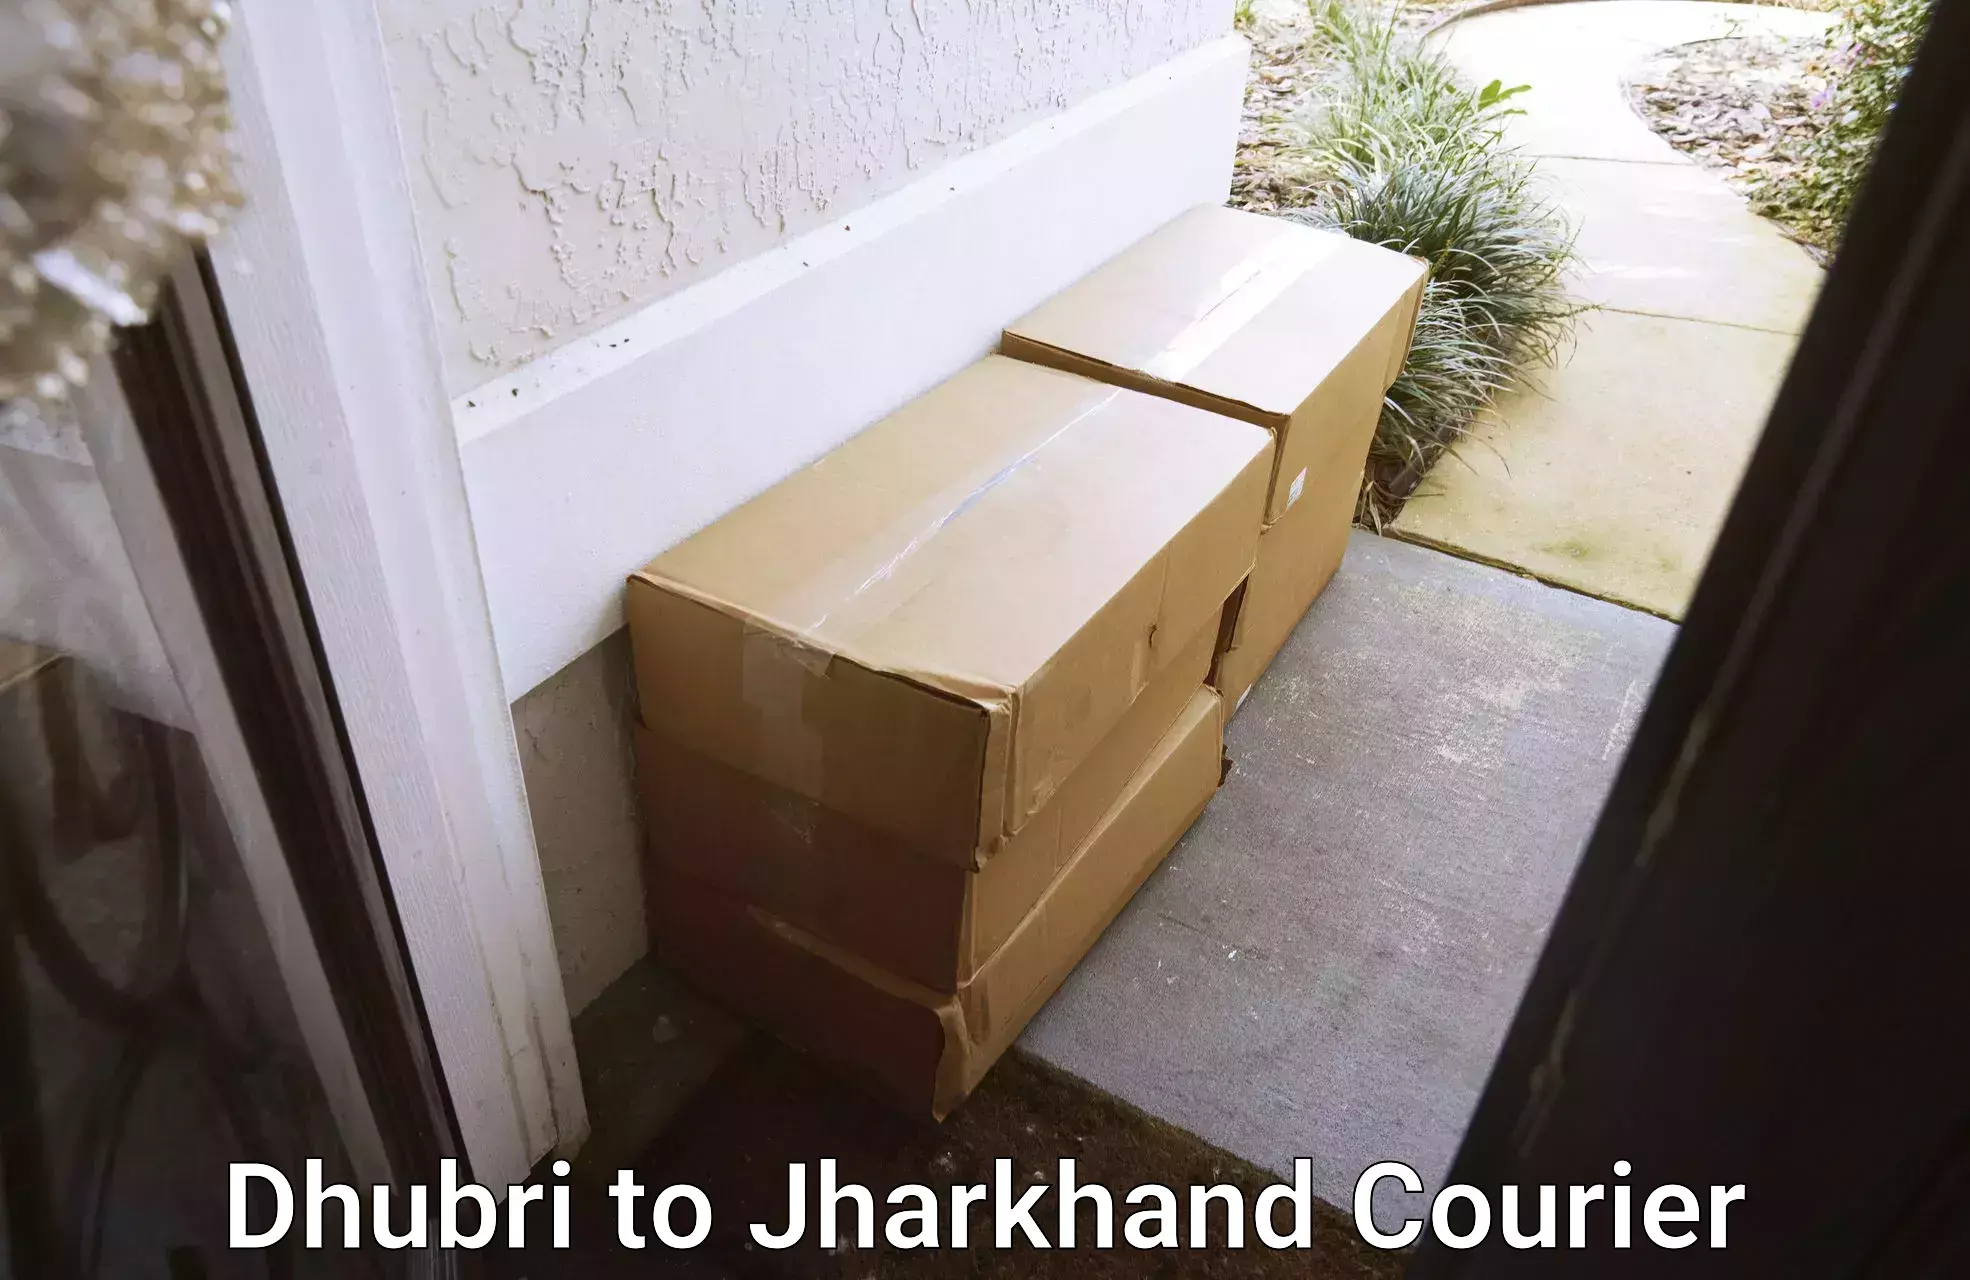 Holiday shipping services Dhubri to Jharkhand